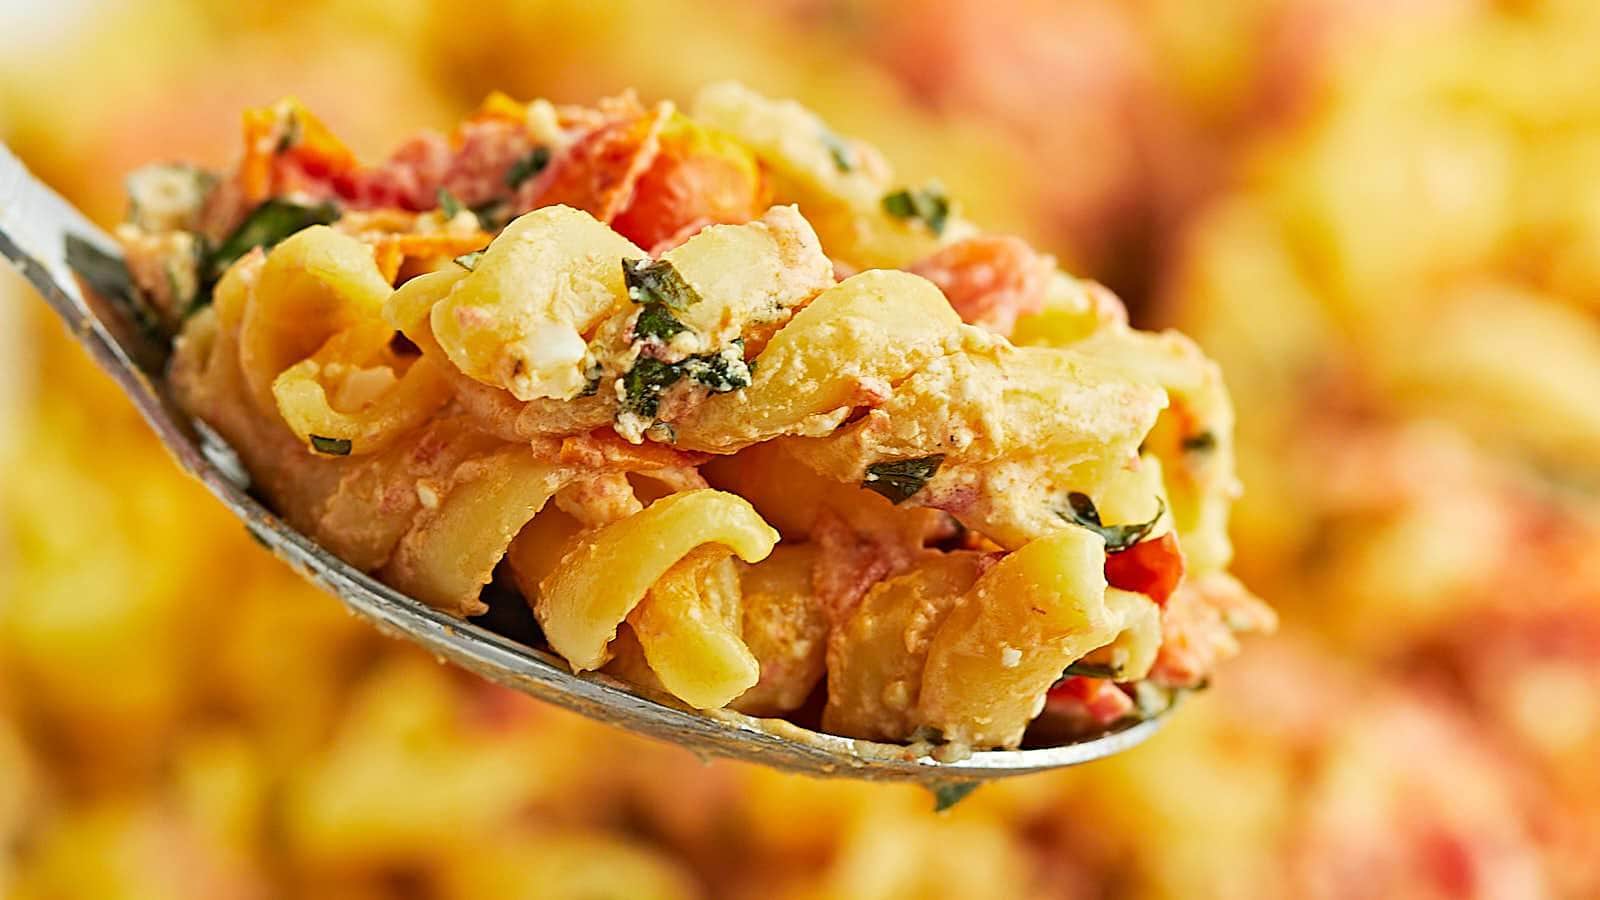 <p>Who says you can't make amazing pasta dishes at home? Our list of 36 can't-miss recipes has got you covered! Imagine the succulent flavors of Shrimp Carbonara or the classic comfort of Chicken Parmesan over pasta, all made easily in your kitchen. Even better, each dish is a snap to make with just 10 ingredients or less. Time to toss that takeout menu.</p>